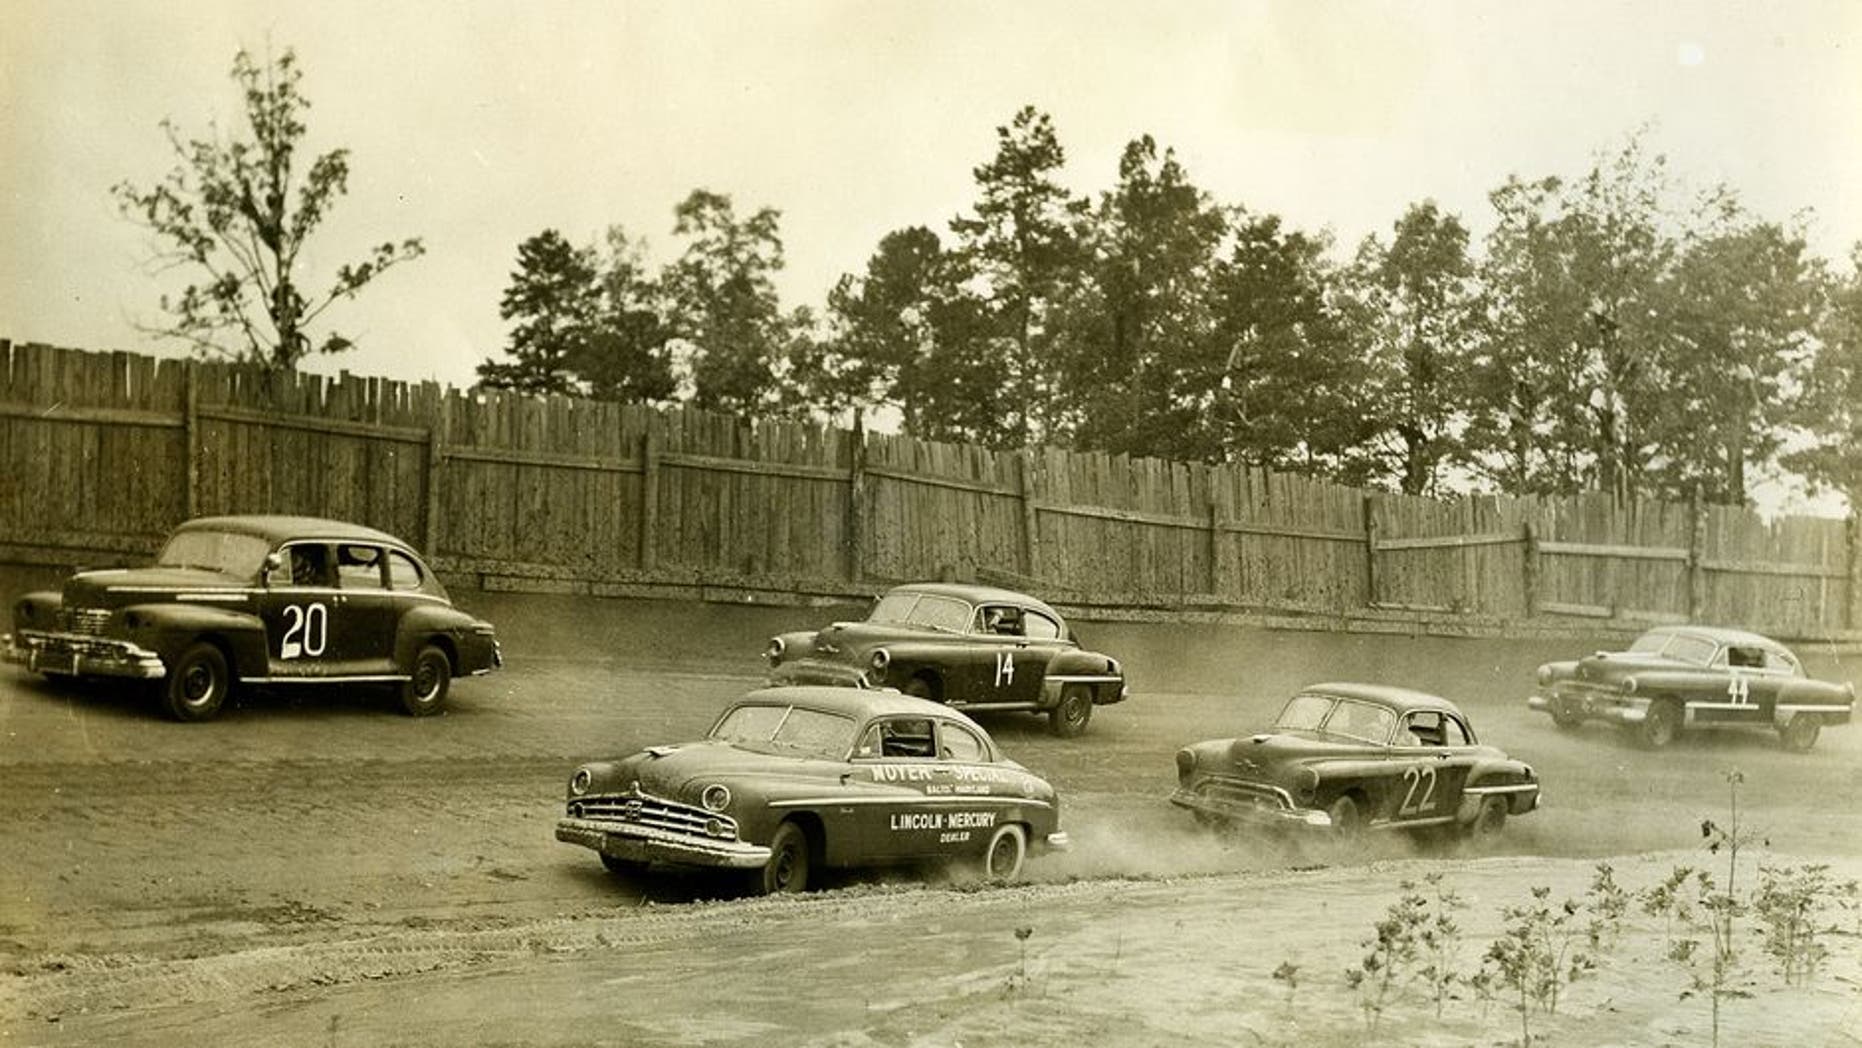 On this day NASCAR's first 'Strictly Stock' race took place in 1949